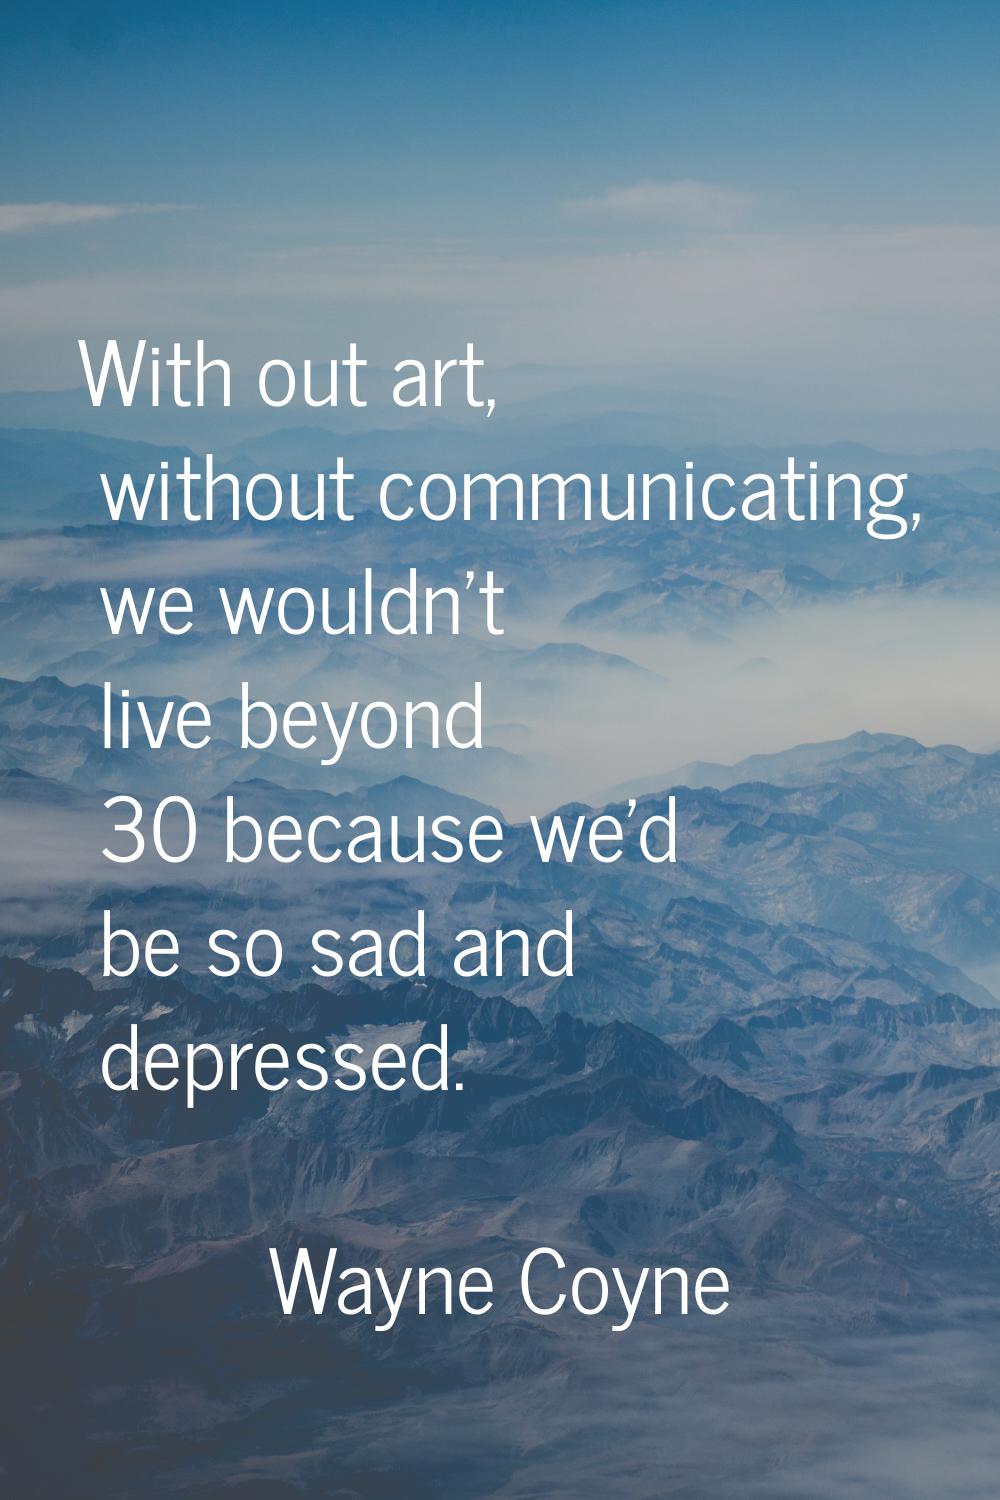 With out art, without communicating, we wouldn't live beyond 30 because we'd be so sad and depresse